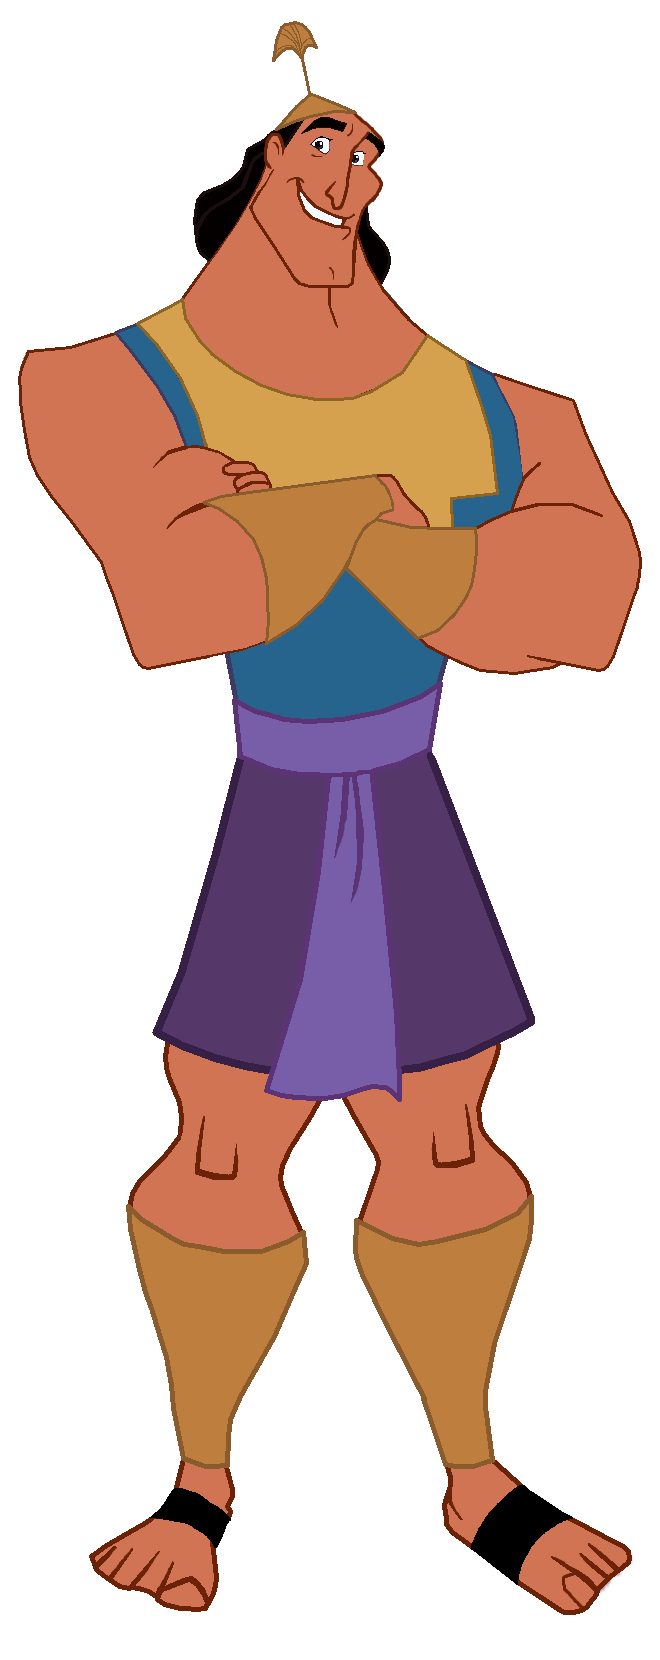 The Emperor's New Groove- Kronk. Emperors new groove, Disney minimalist, The emperor's new groove